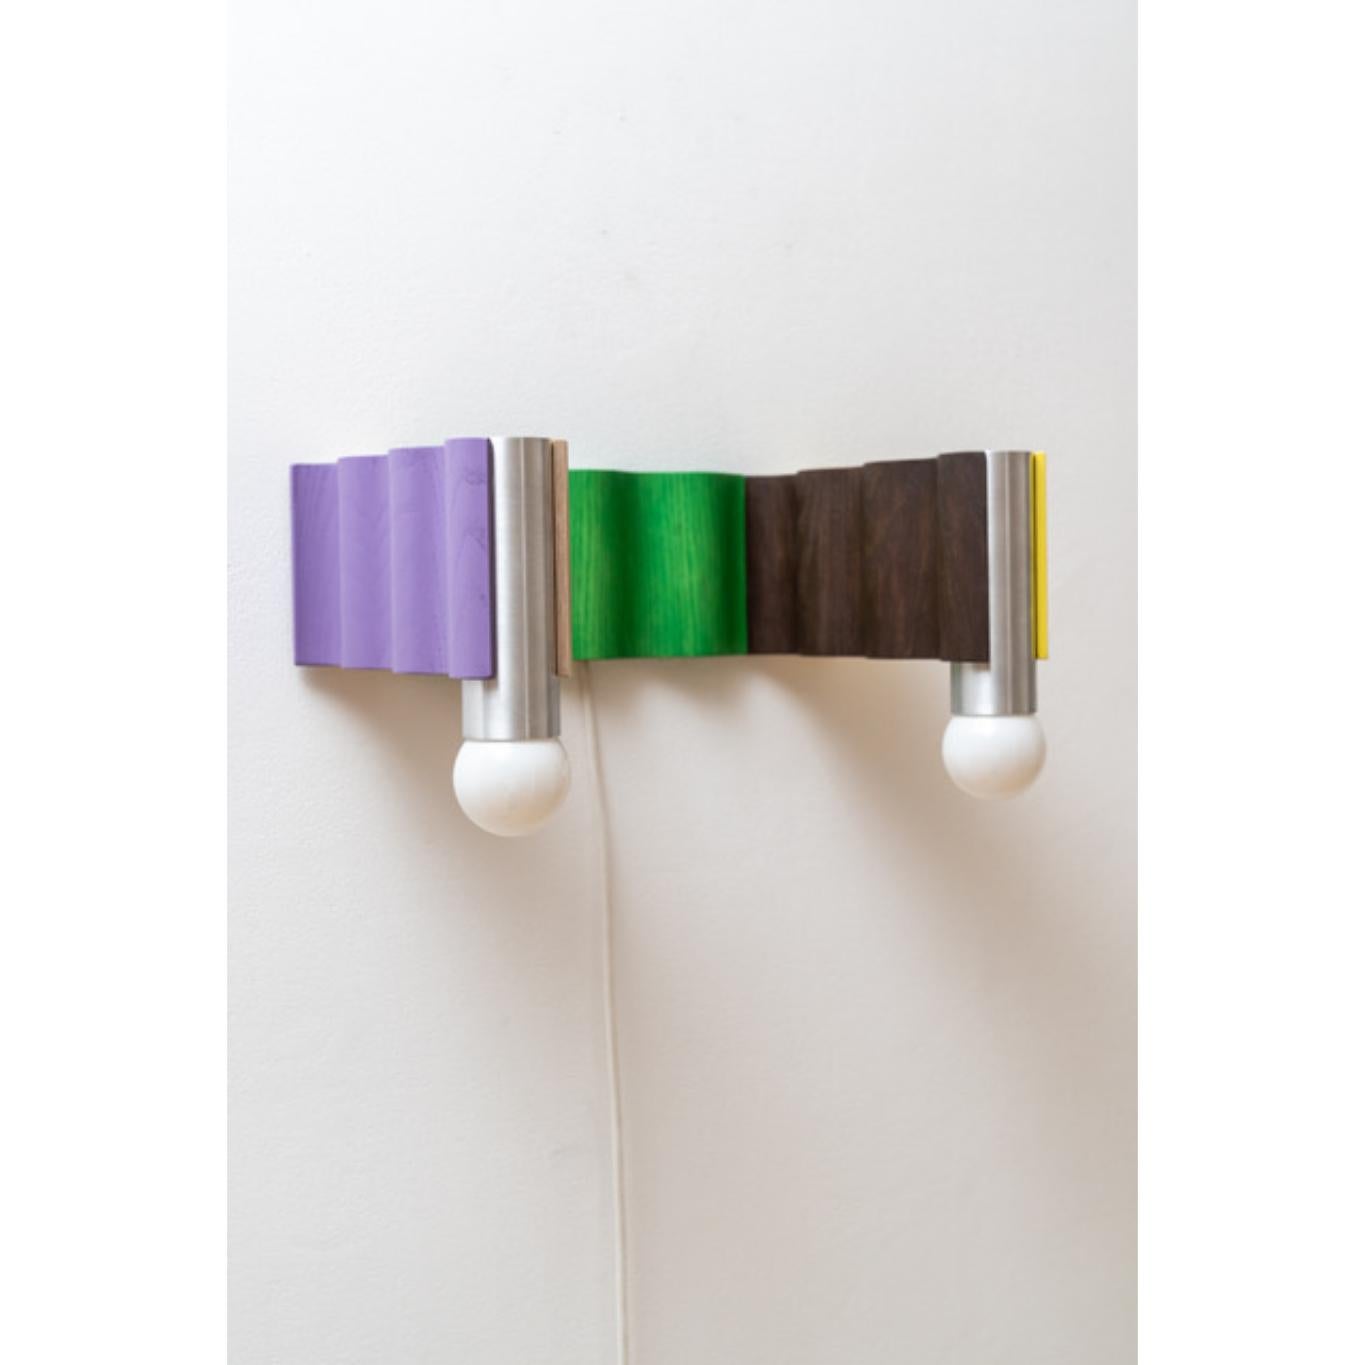 English Multicolored Corrugation Lights Double Sconce by Theodora Alfredsdottir For Sale